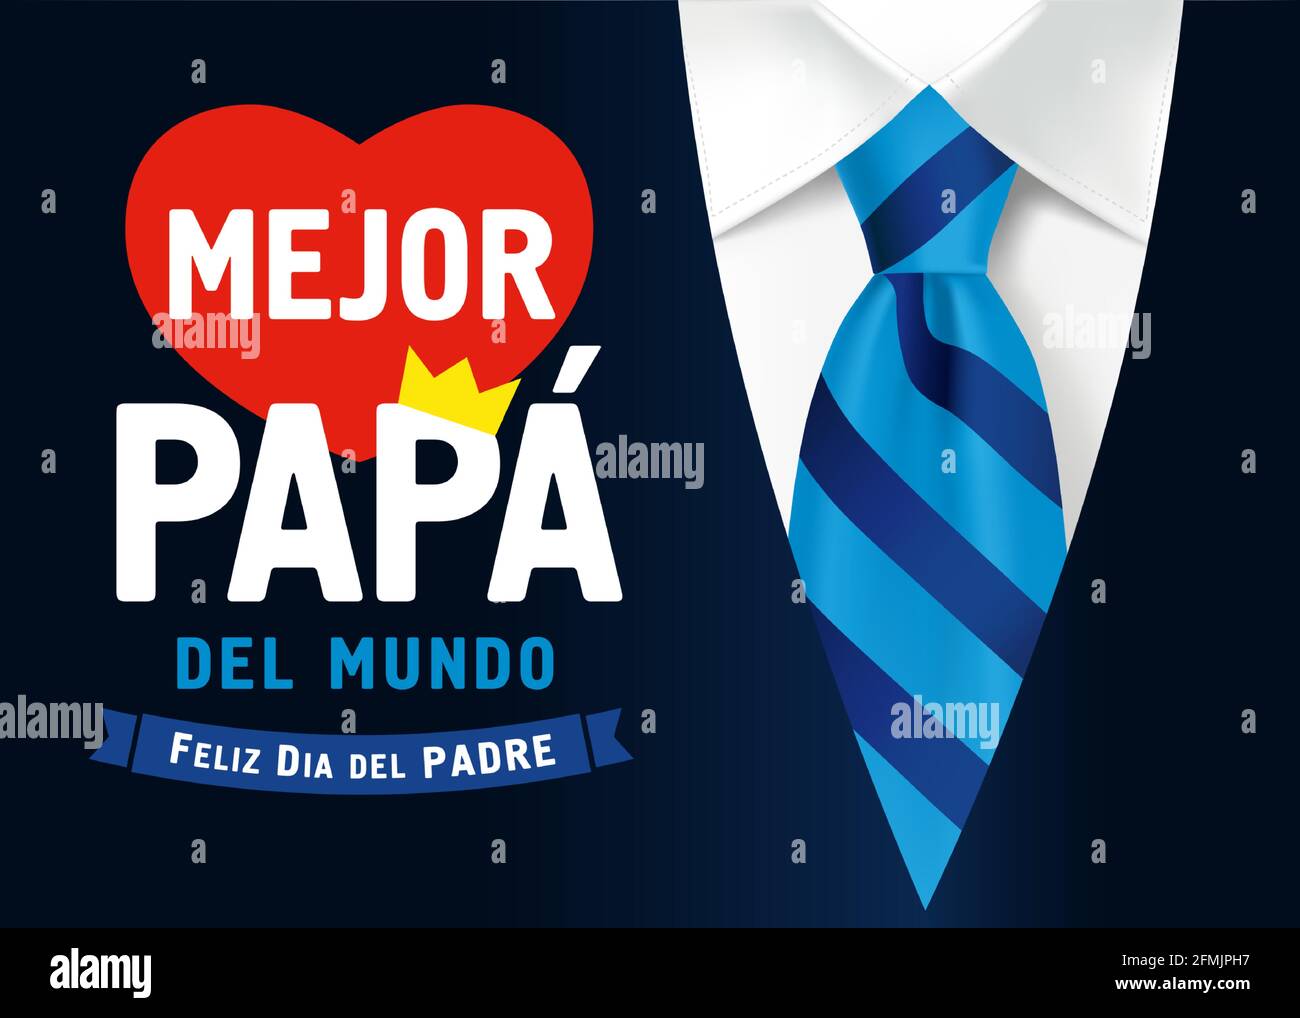 El Mejor Papa del mundo, Feliz dia del Padre spanish text, translate - I love you Dad, Happy fathers day. Father day vector illustration with letterin Stock Vector